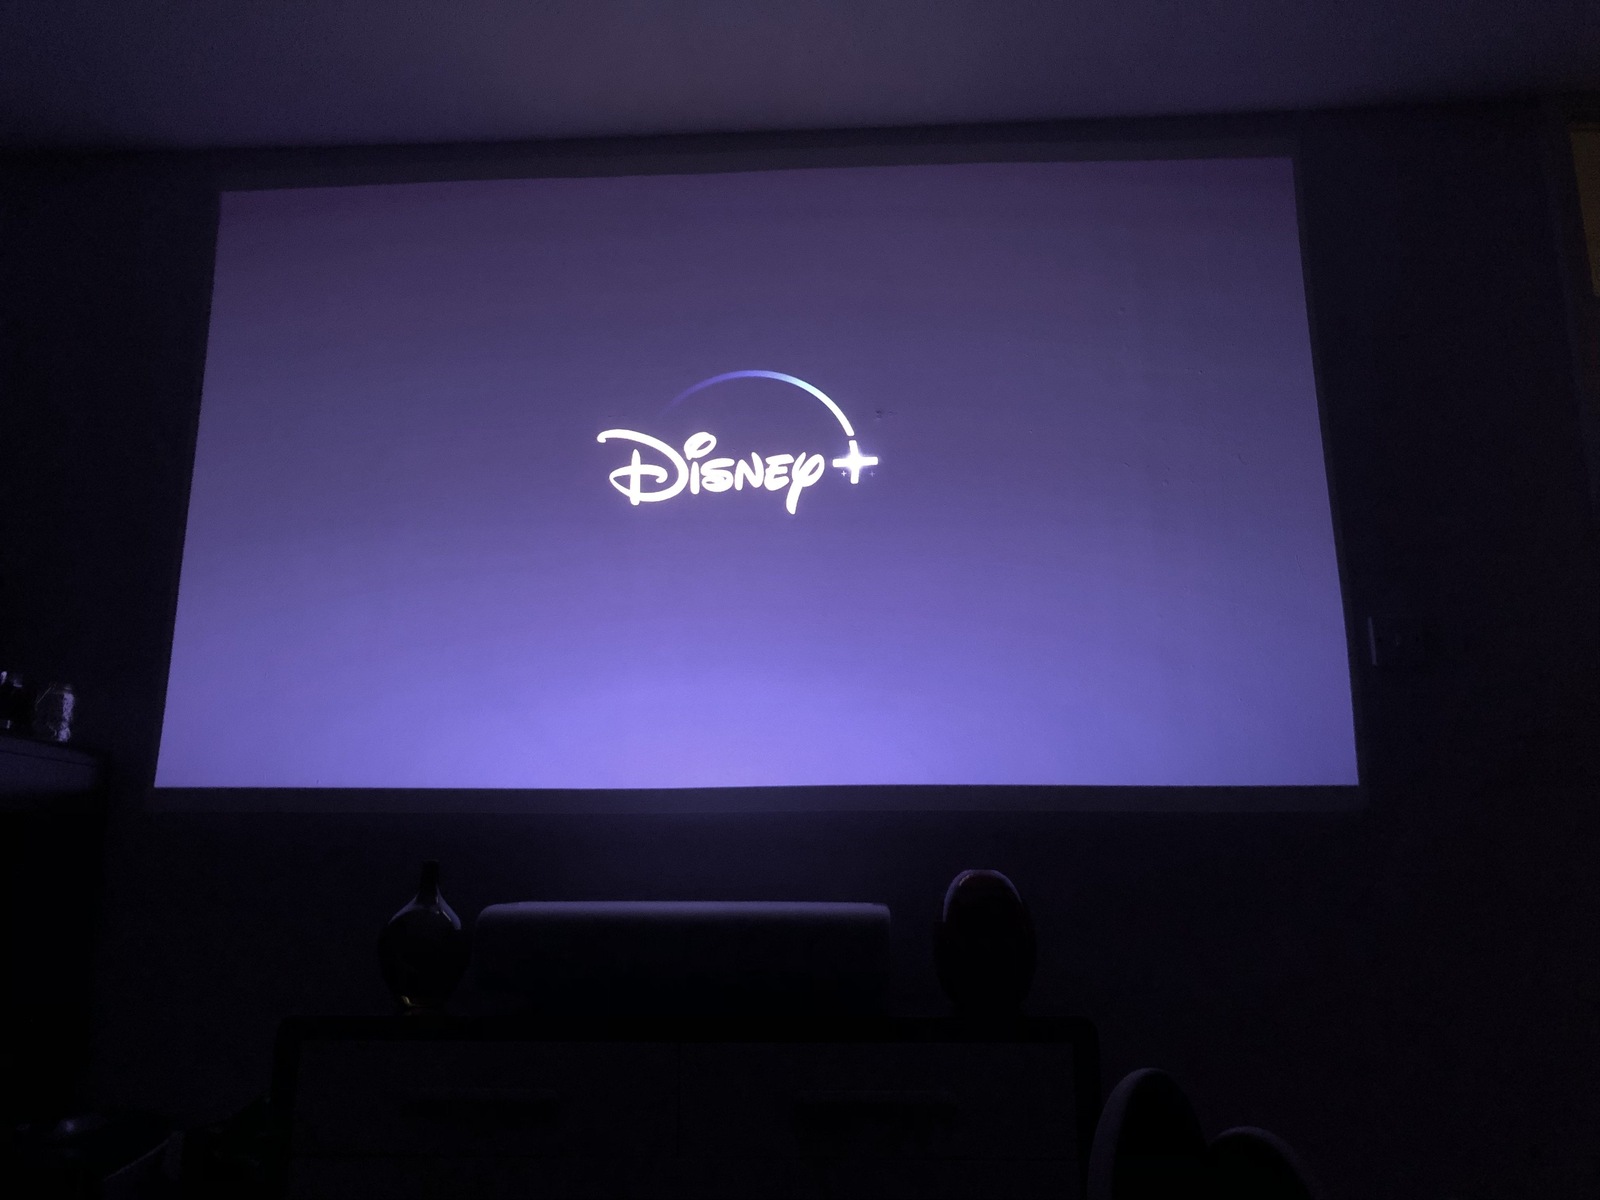 How To Project Disney Plus On Projector